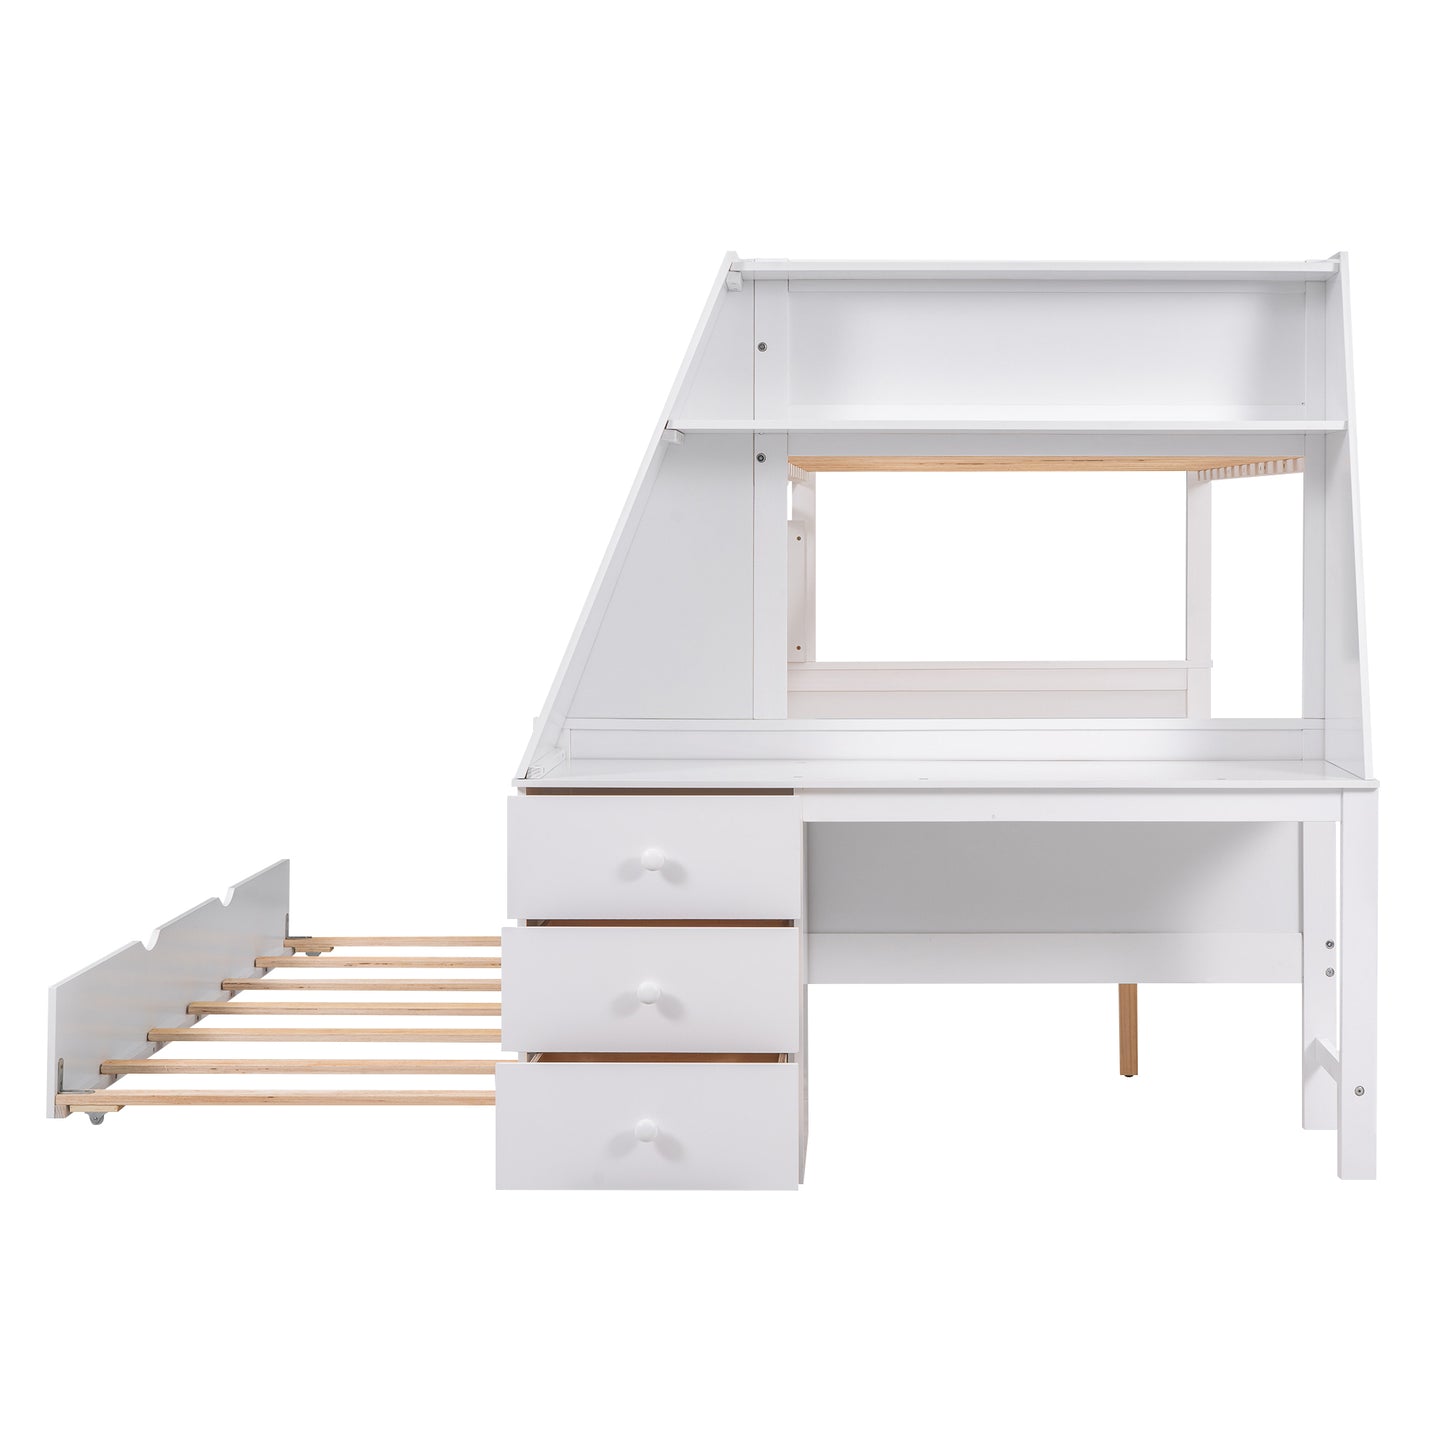 Twin over Full Bunk Bed with Trundle and Built-in Desk, Three Storage Drawers and Shelf,White - Enova Luxe Home Store